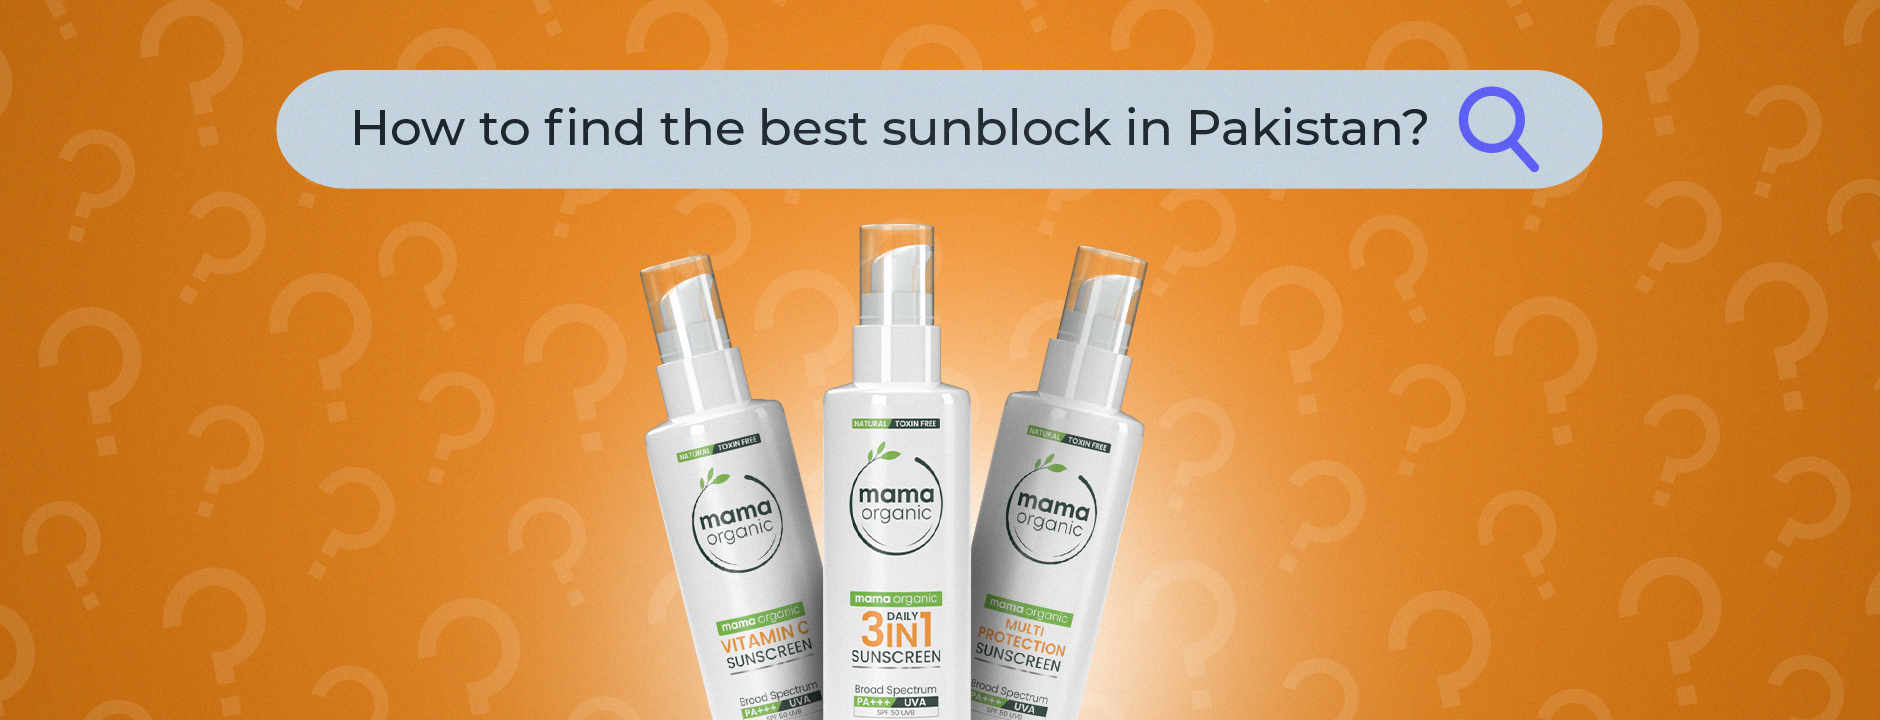 How to Choose and Use the Best Sunblock for Oily Skin in Pakistan